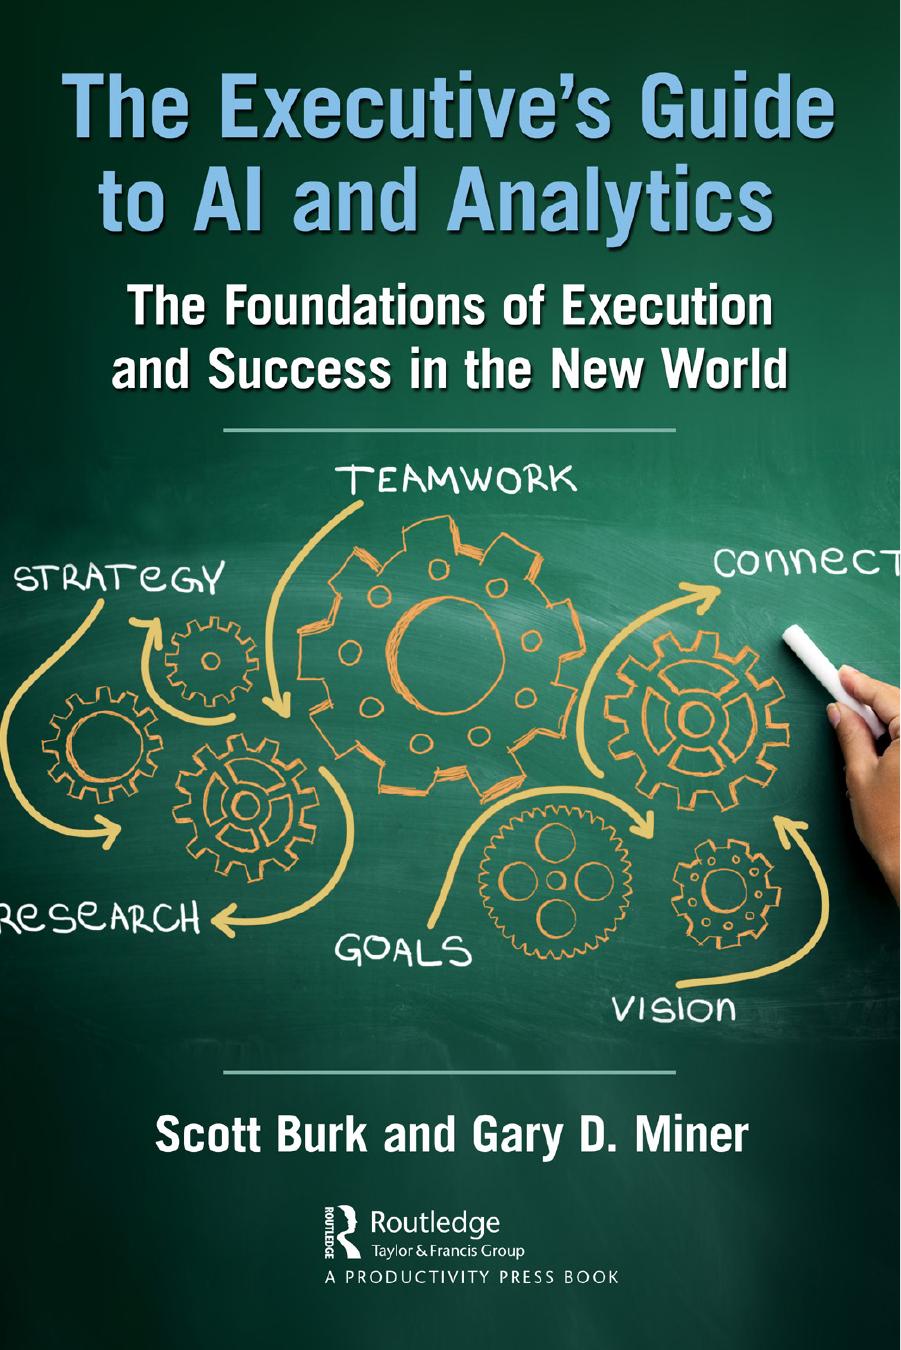 The Executive’s Guide to AI and Analytics: The Foundations of Execution and Success in the New World